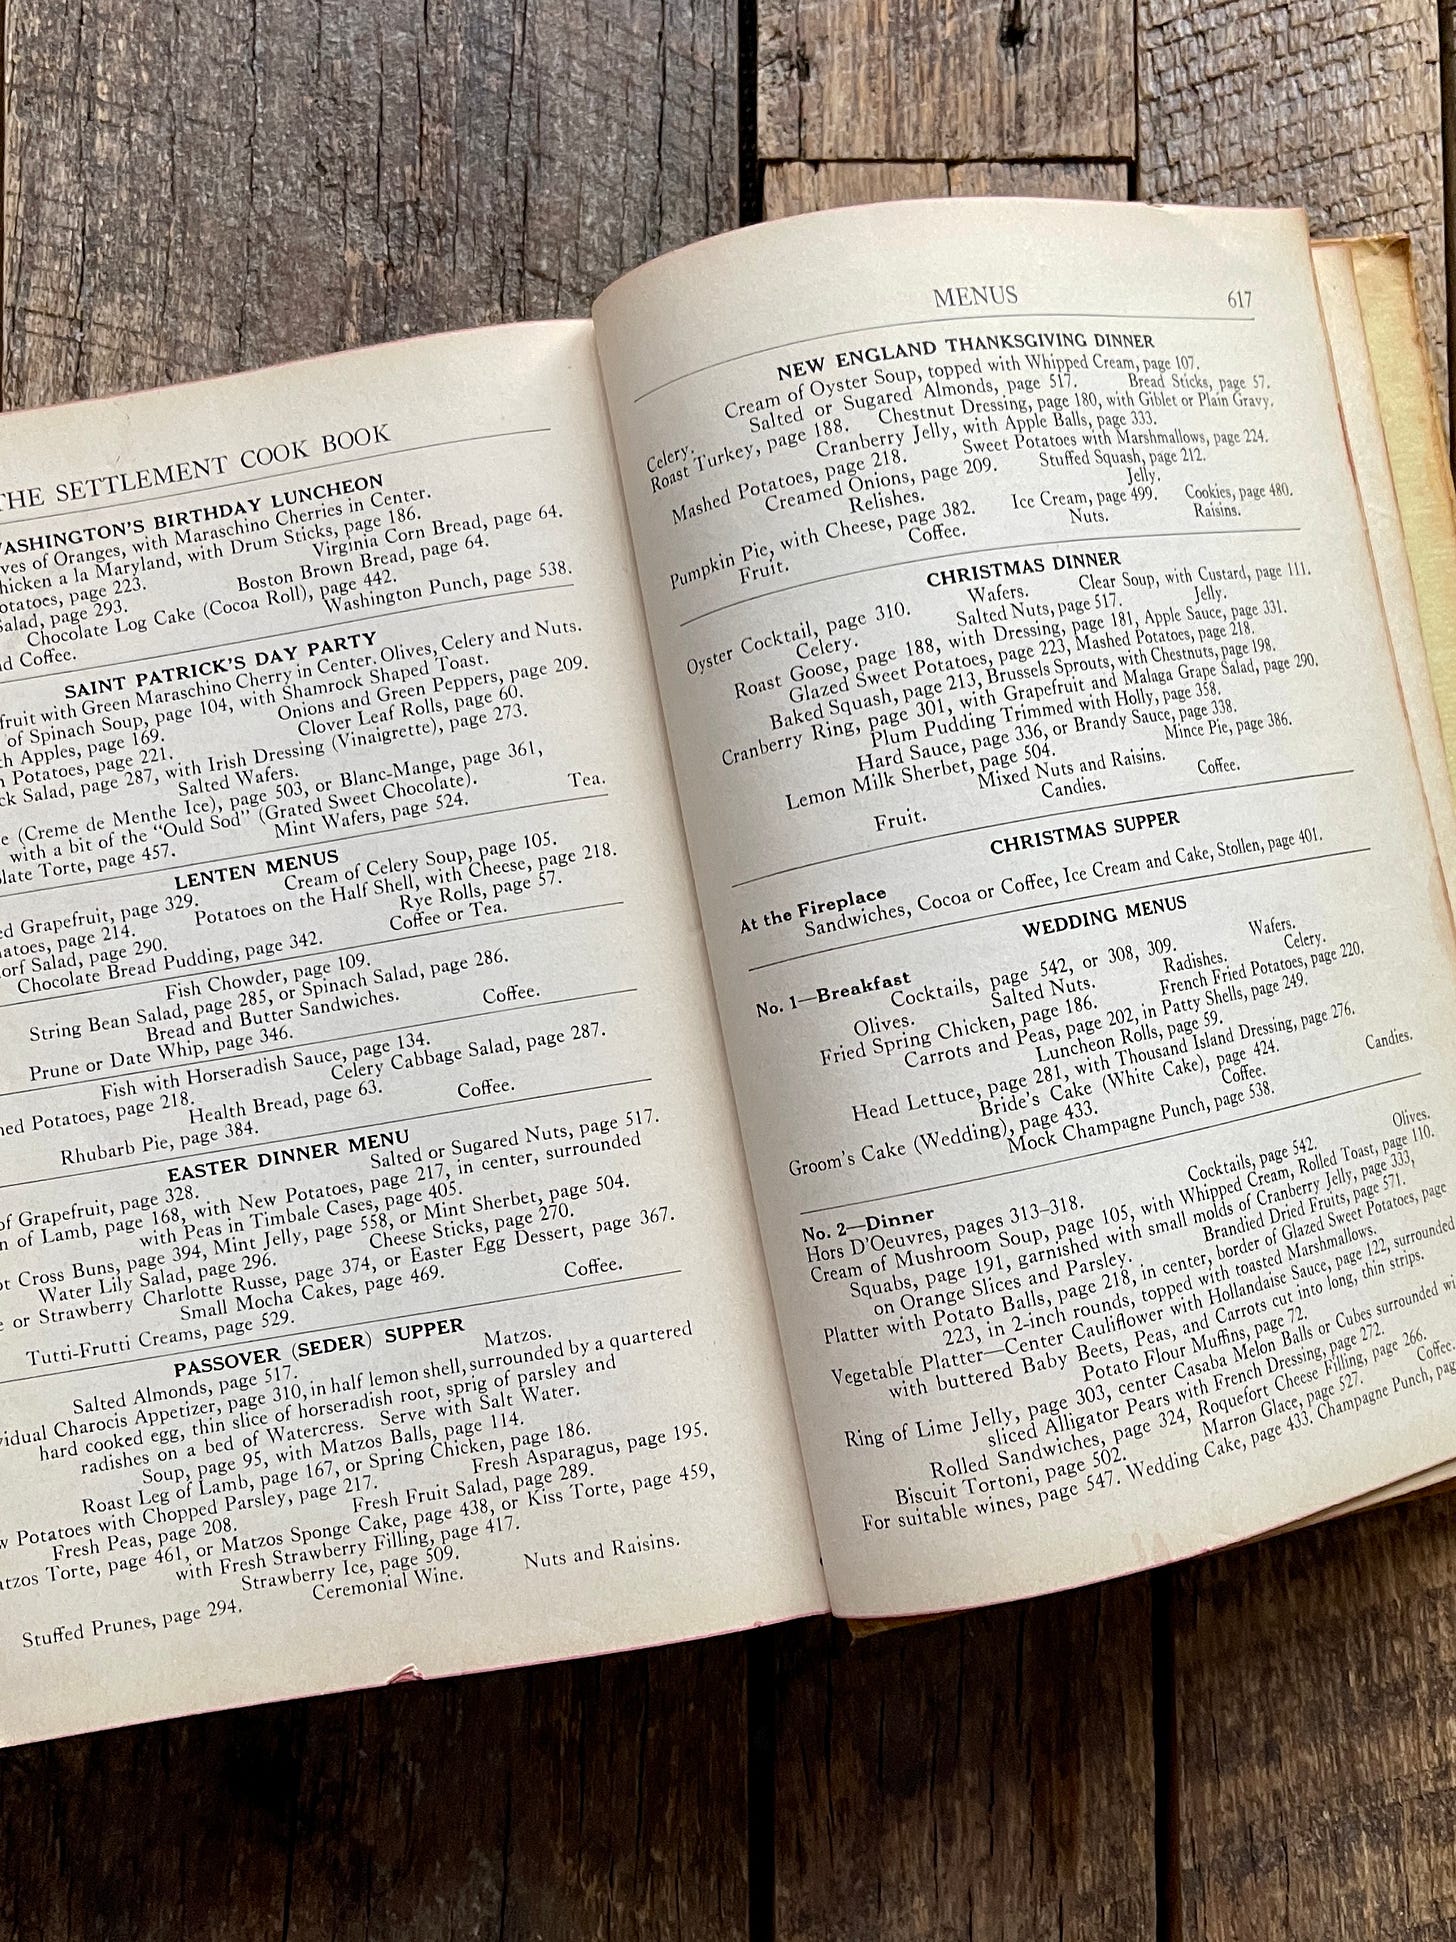 The way to a man's heart: The Settlement Cook Book menu pages